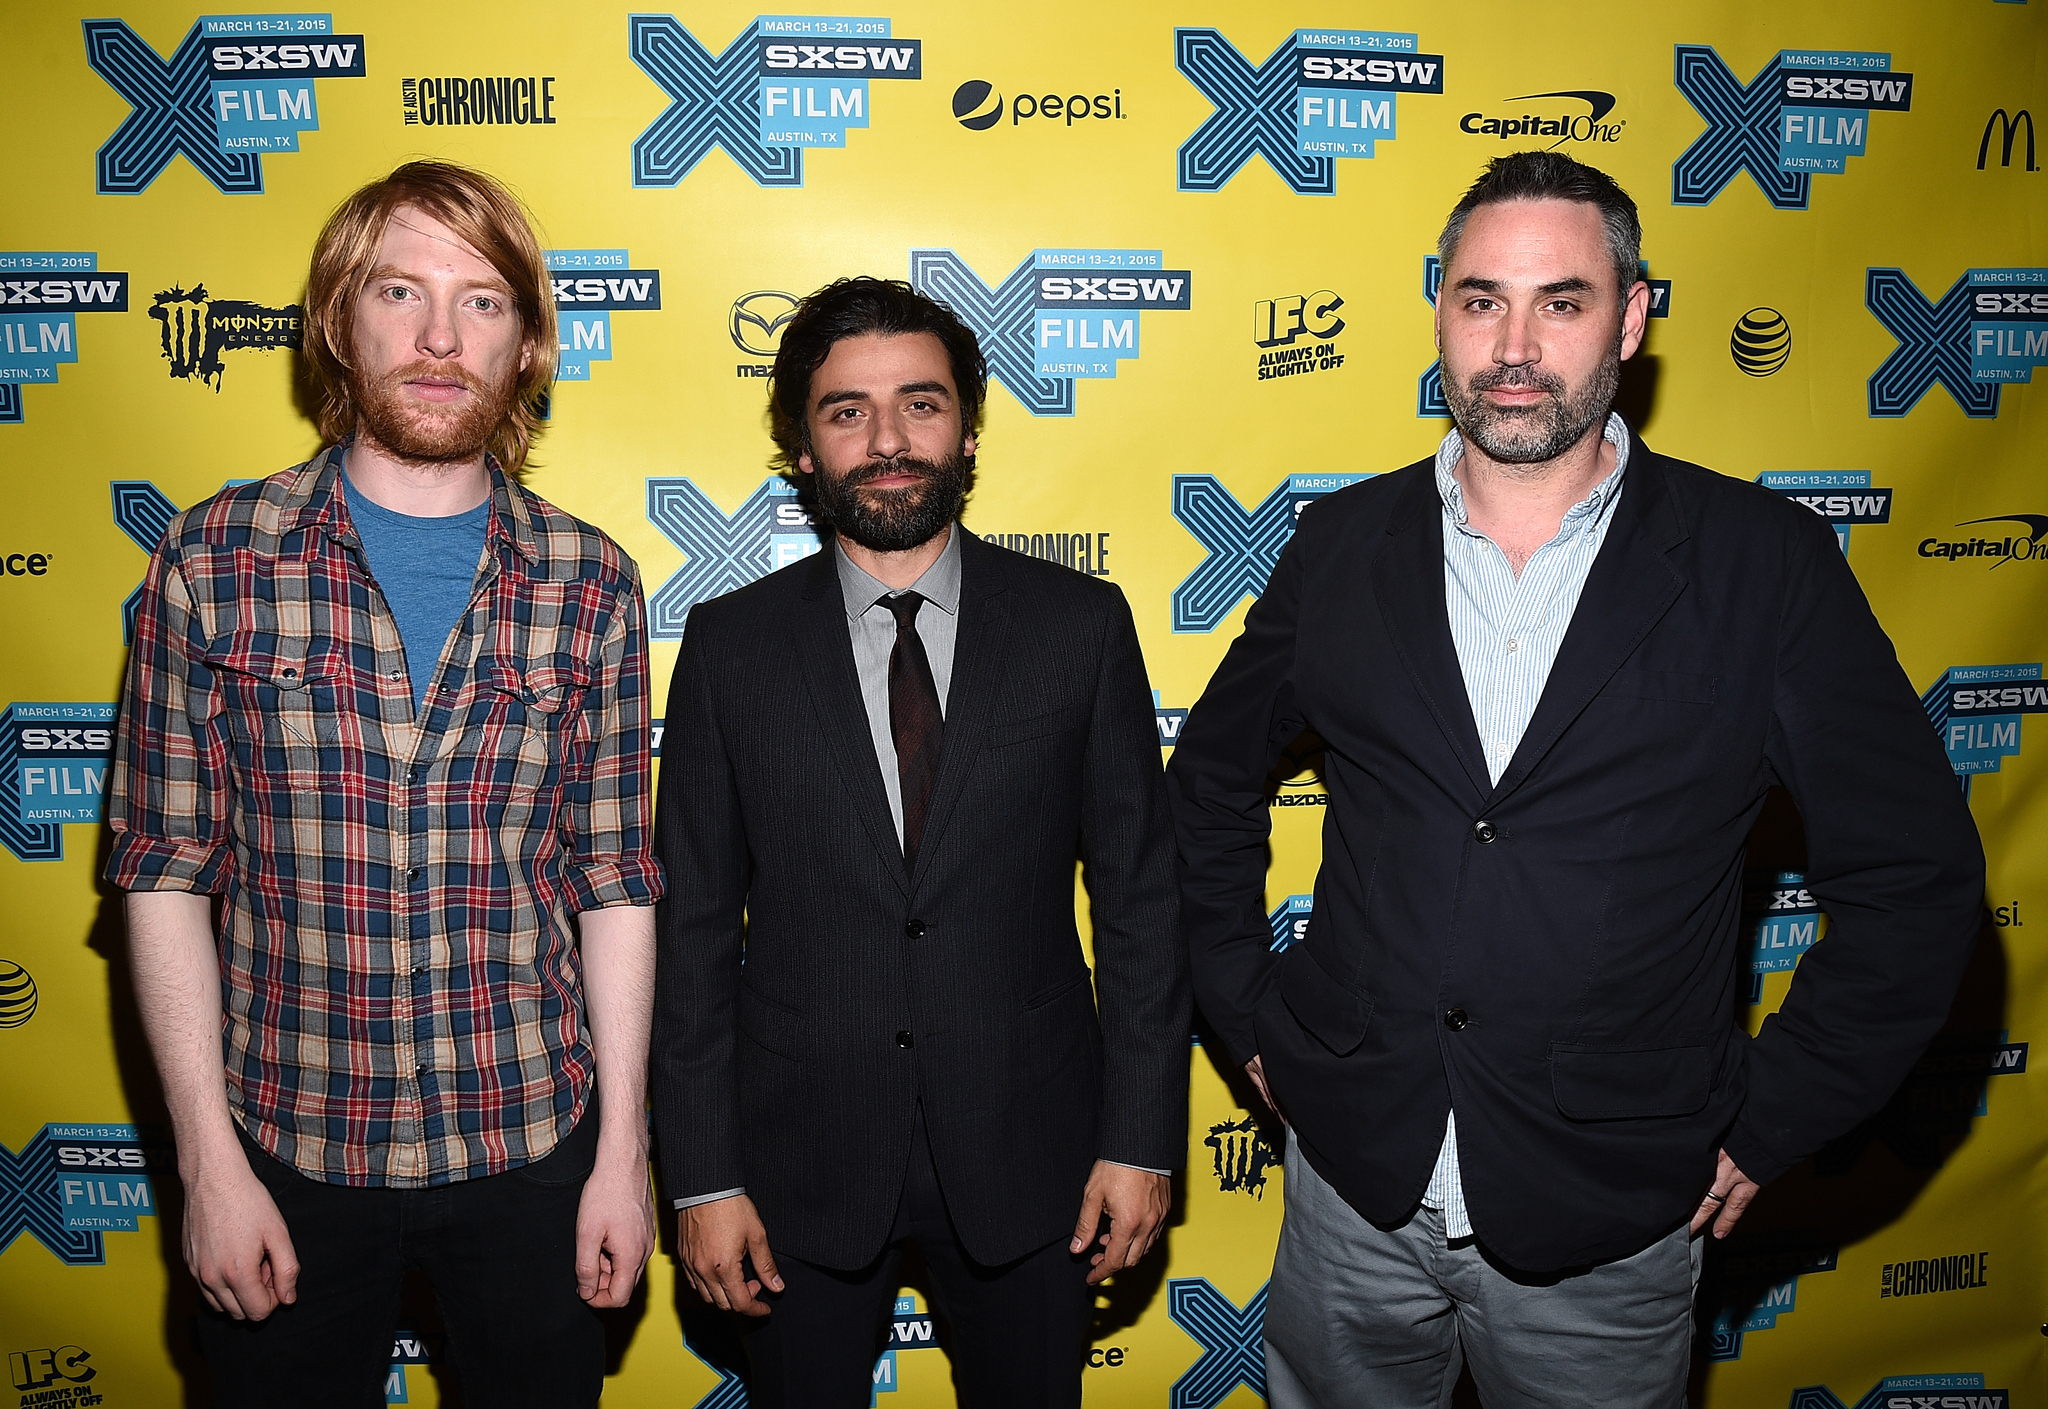 Alex Garland, Oscar Isaac and Domhnall Gleeson at event of Ex Machina (2015)